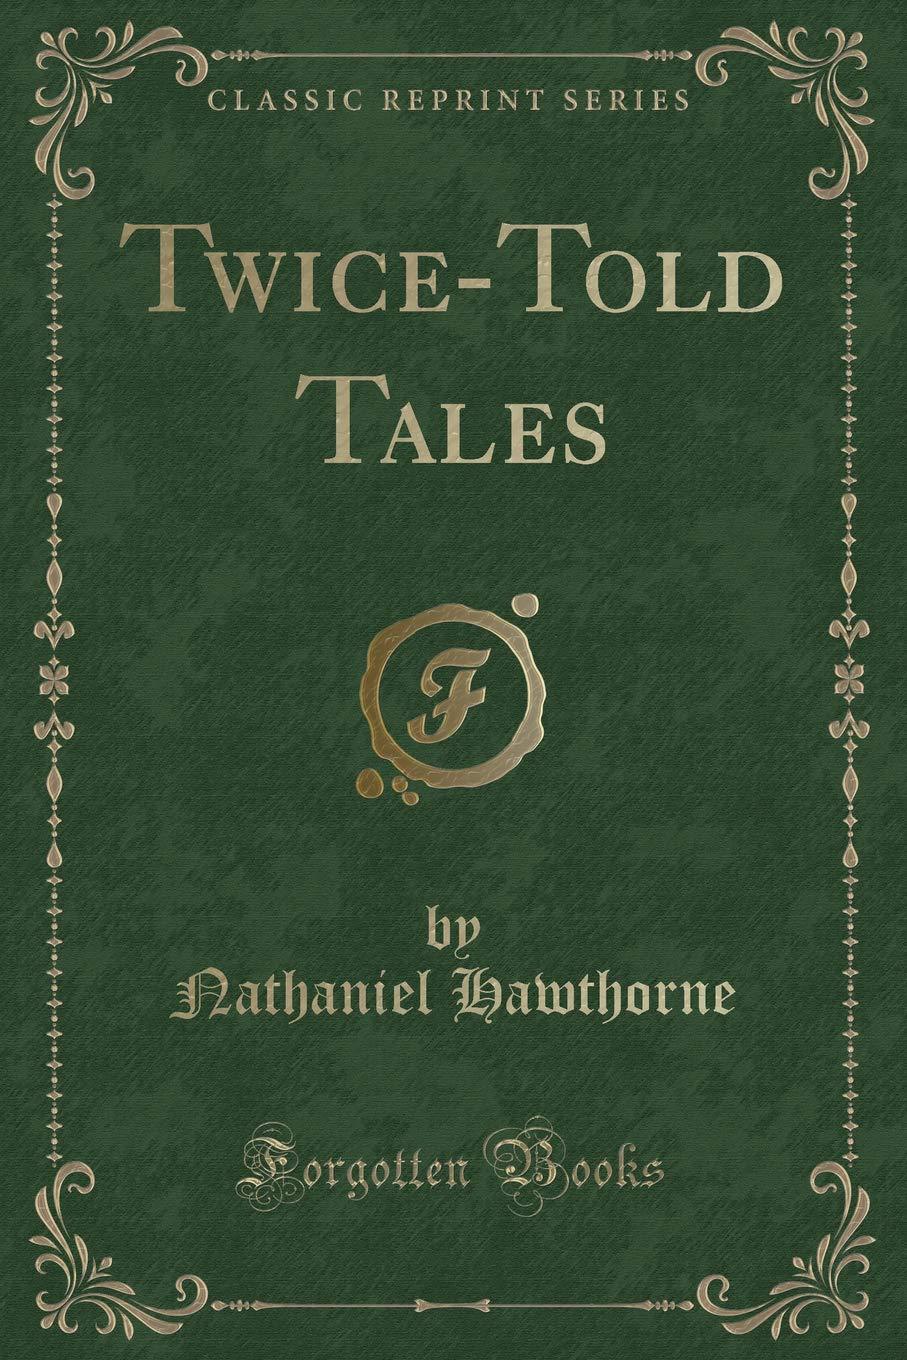 What is a twice-told tale?